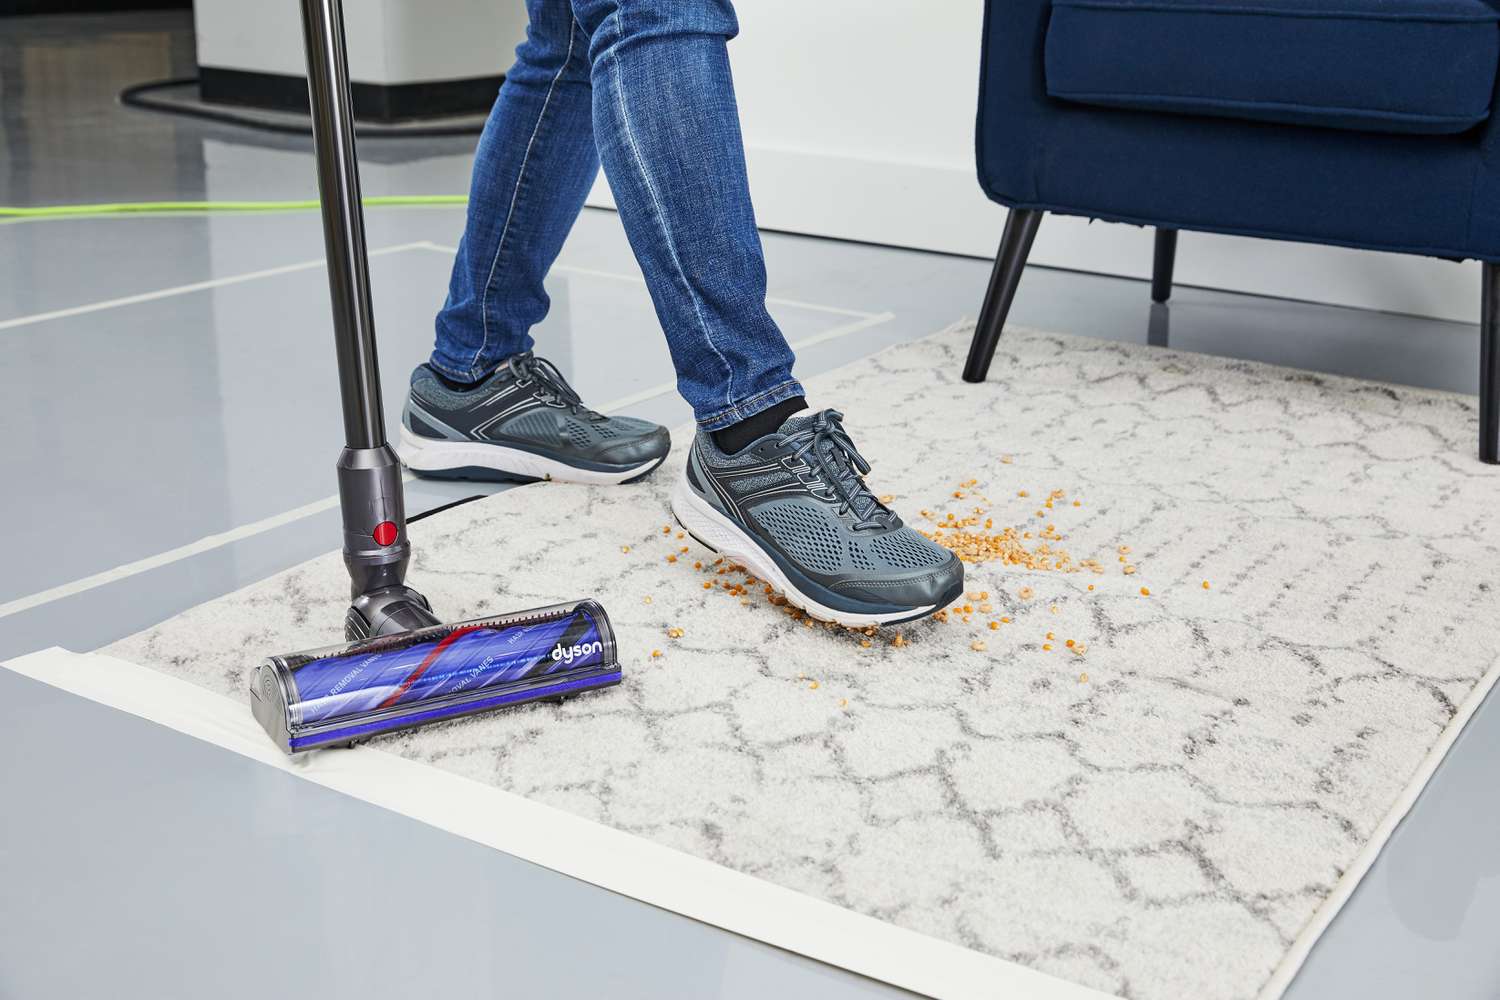 Dyson V12 Detect Slim beside a foot stepping on food on a rug